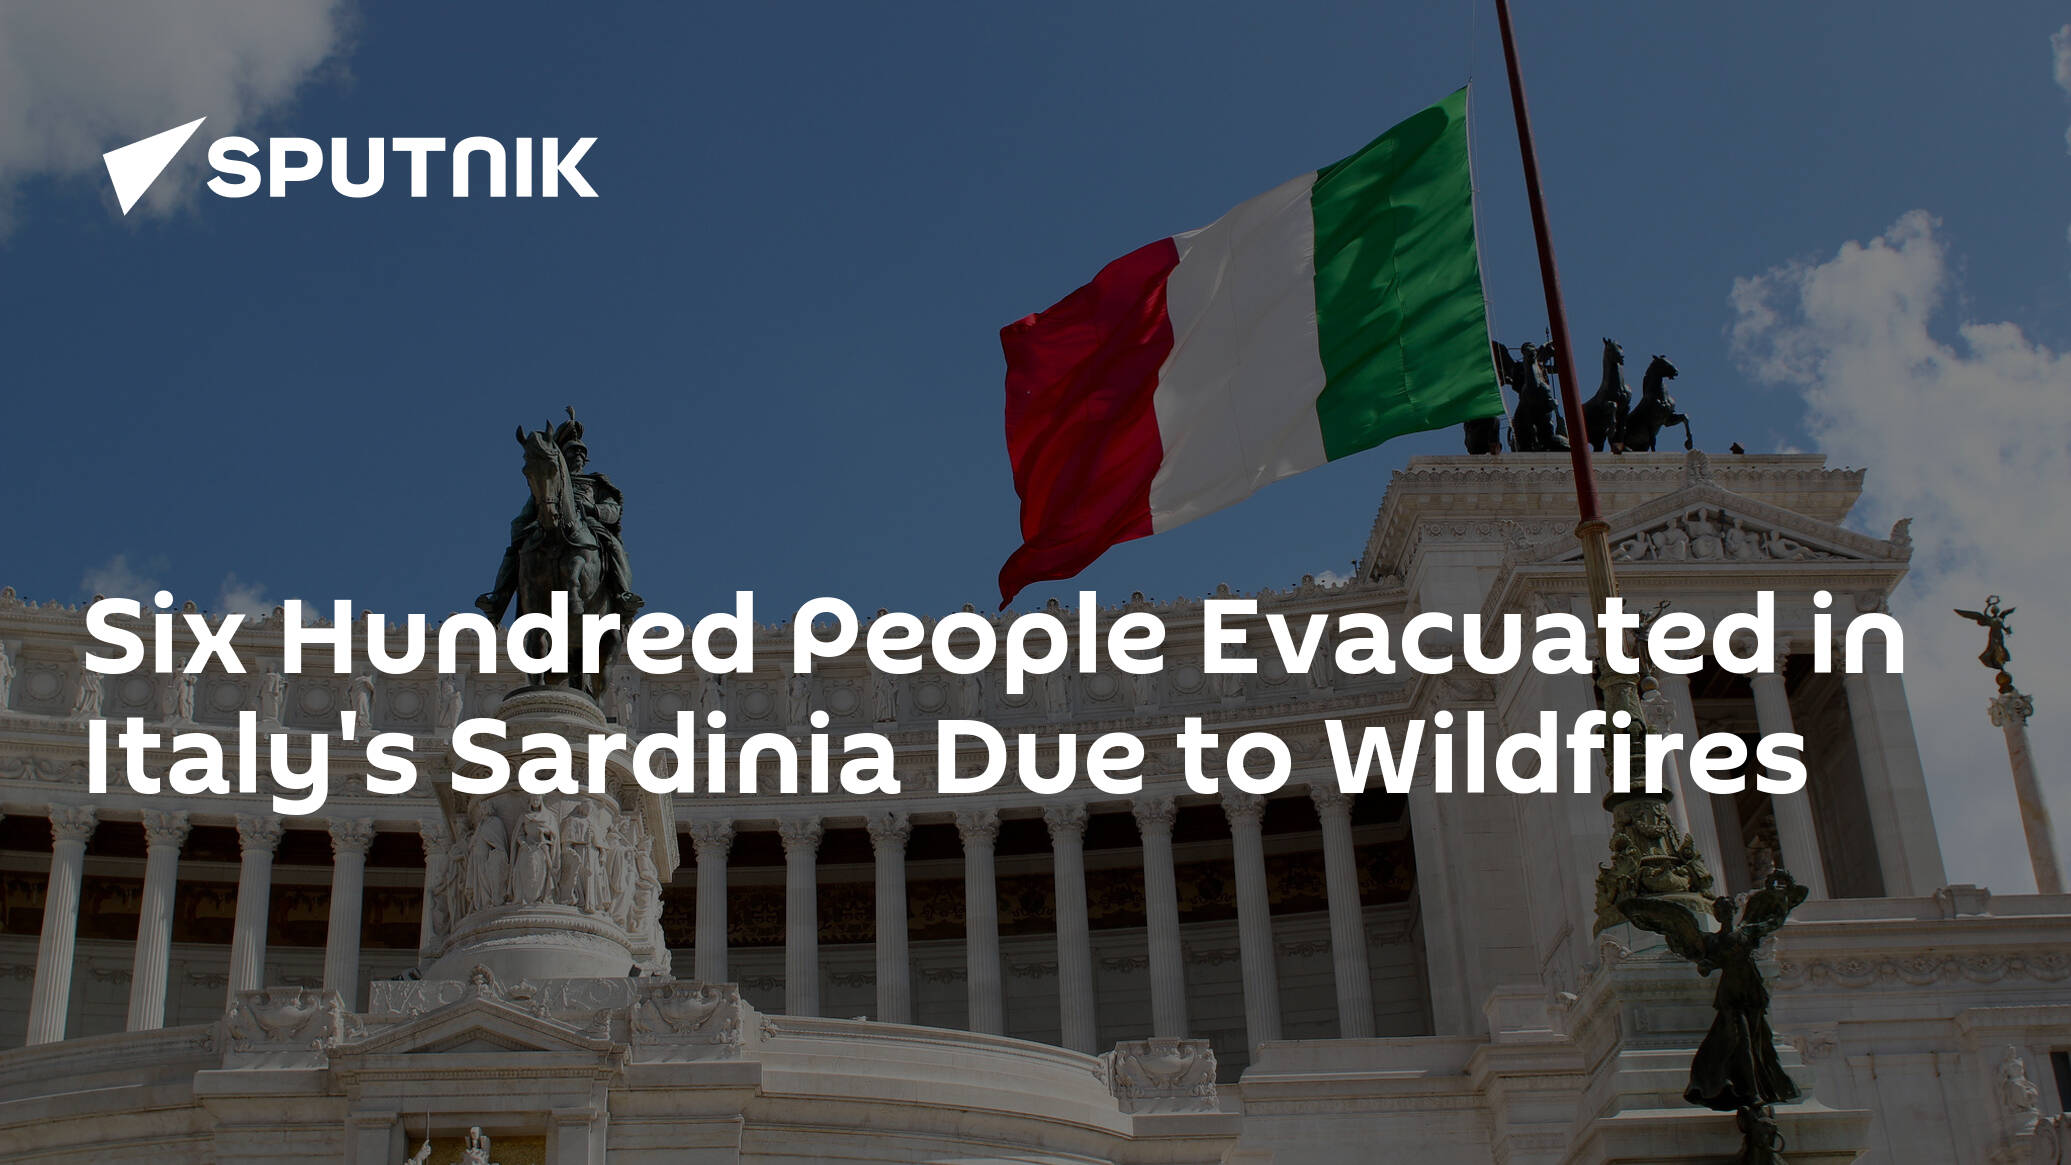 Six Hundred People Evacuated in Italy's Sardinia Due to Wildfires